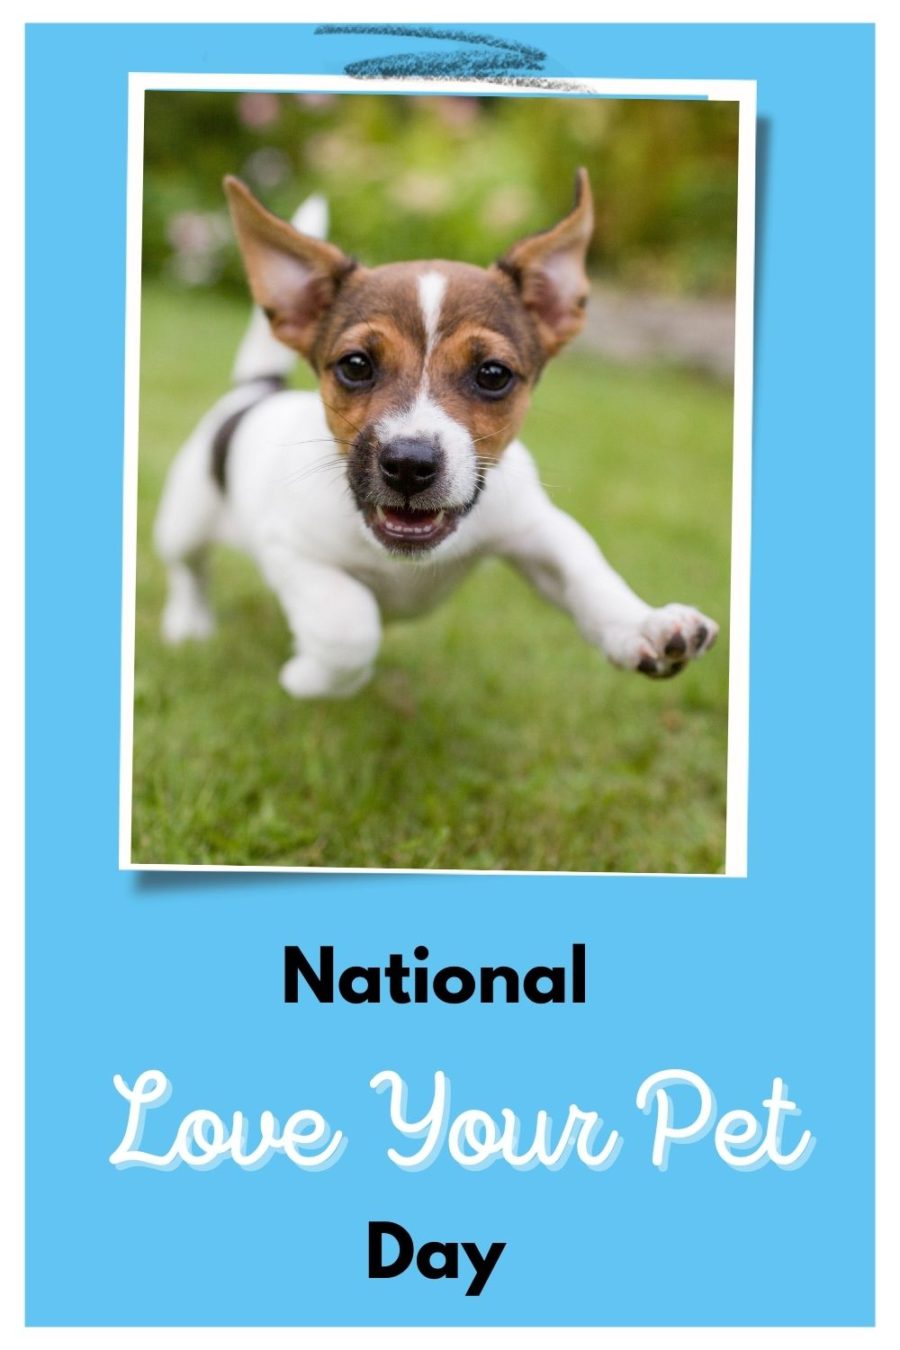 10 Ways to Love Your Dog on National Love Your Pet Day!